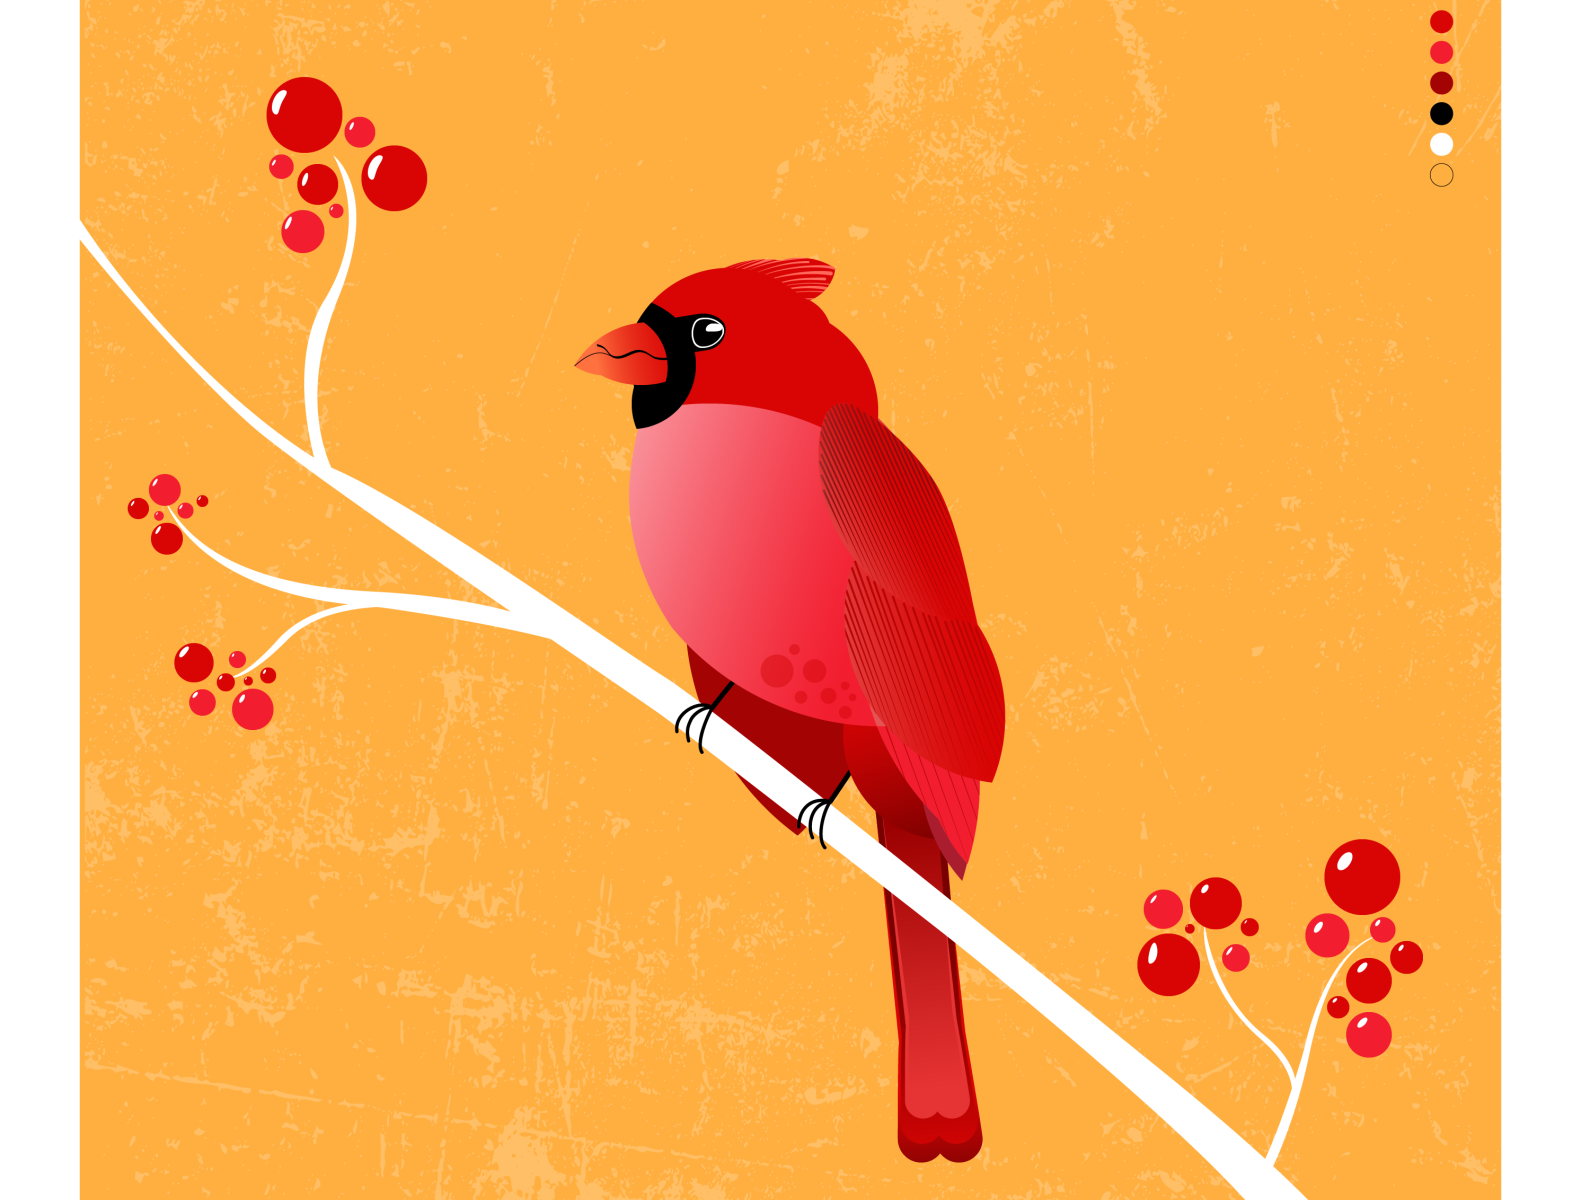 the-red-cardinal-by-julie-scaria-on-dribbble